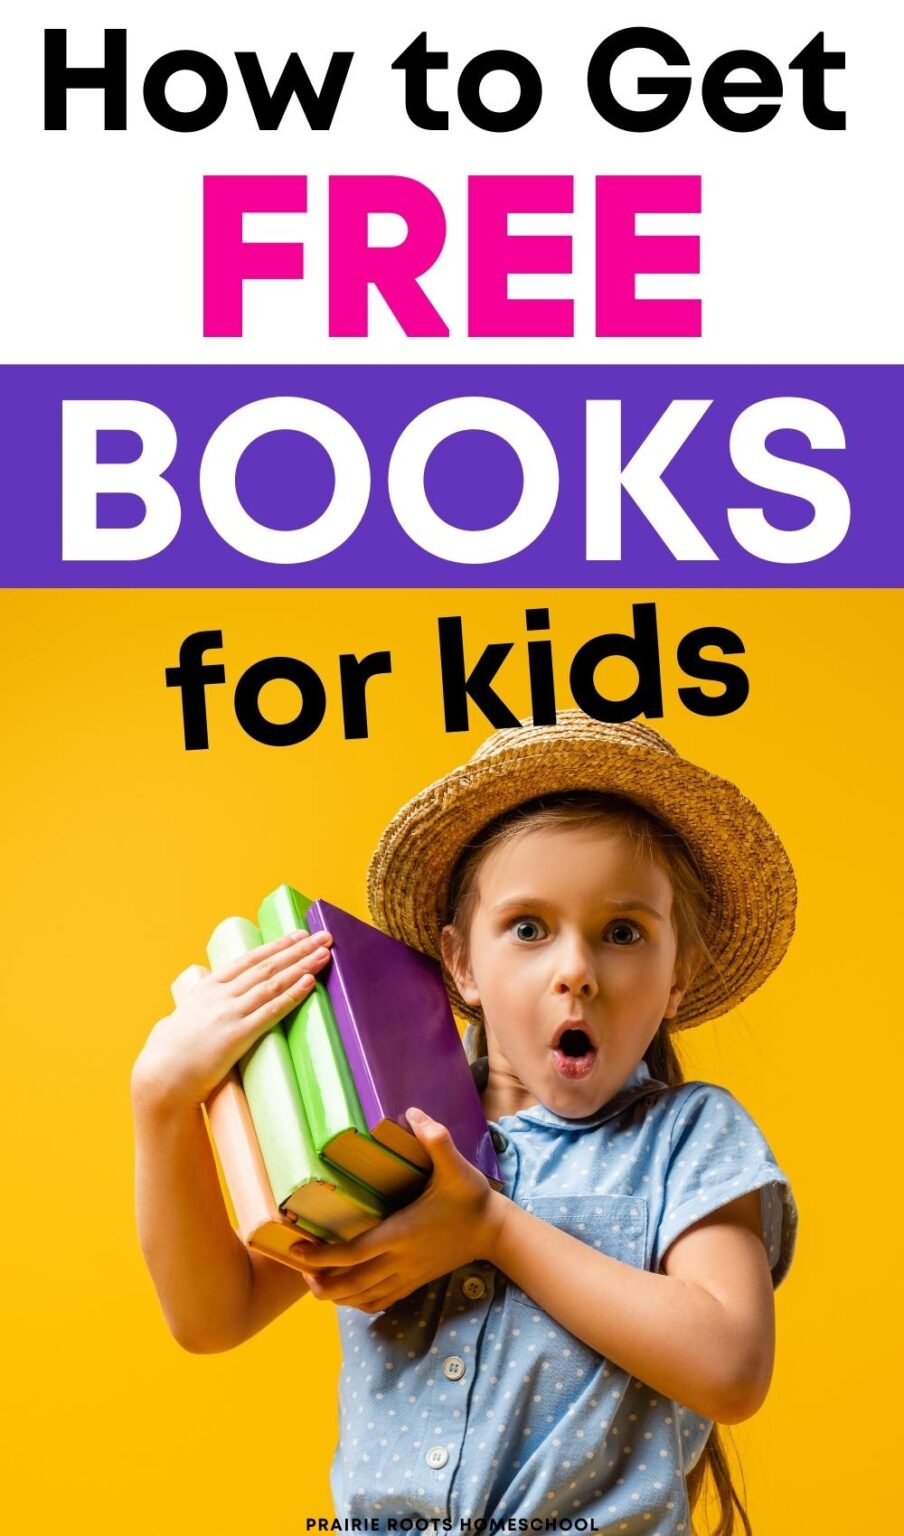 how-to-get-free-books-for-kids-by-mail-and-more-prairie-roots